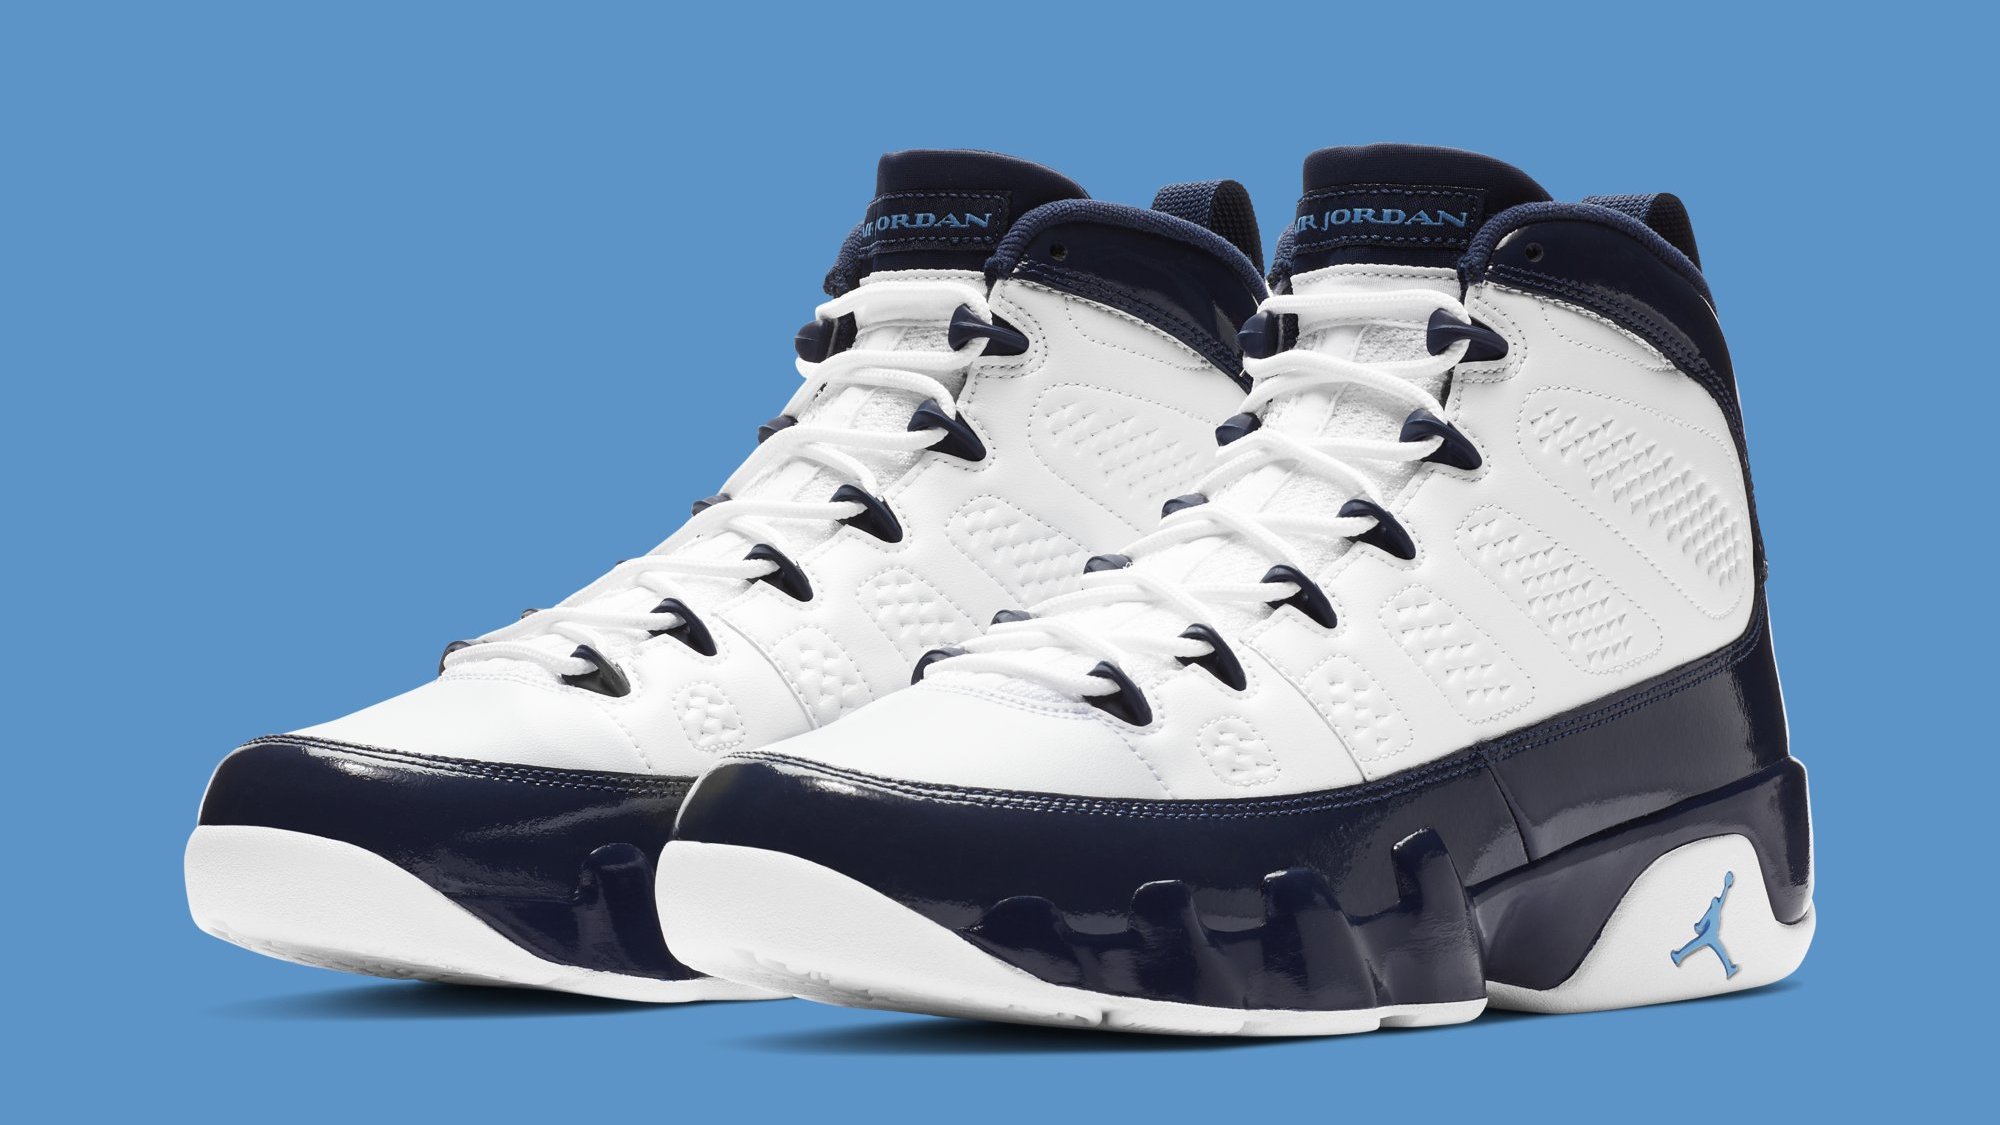 jordans coming out february 9th